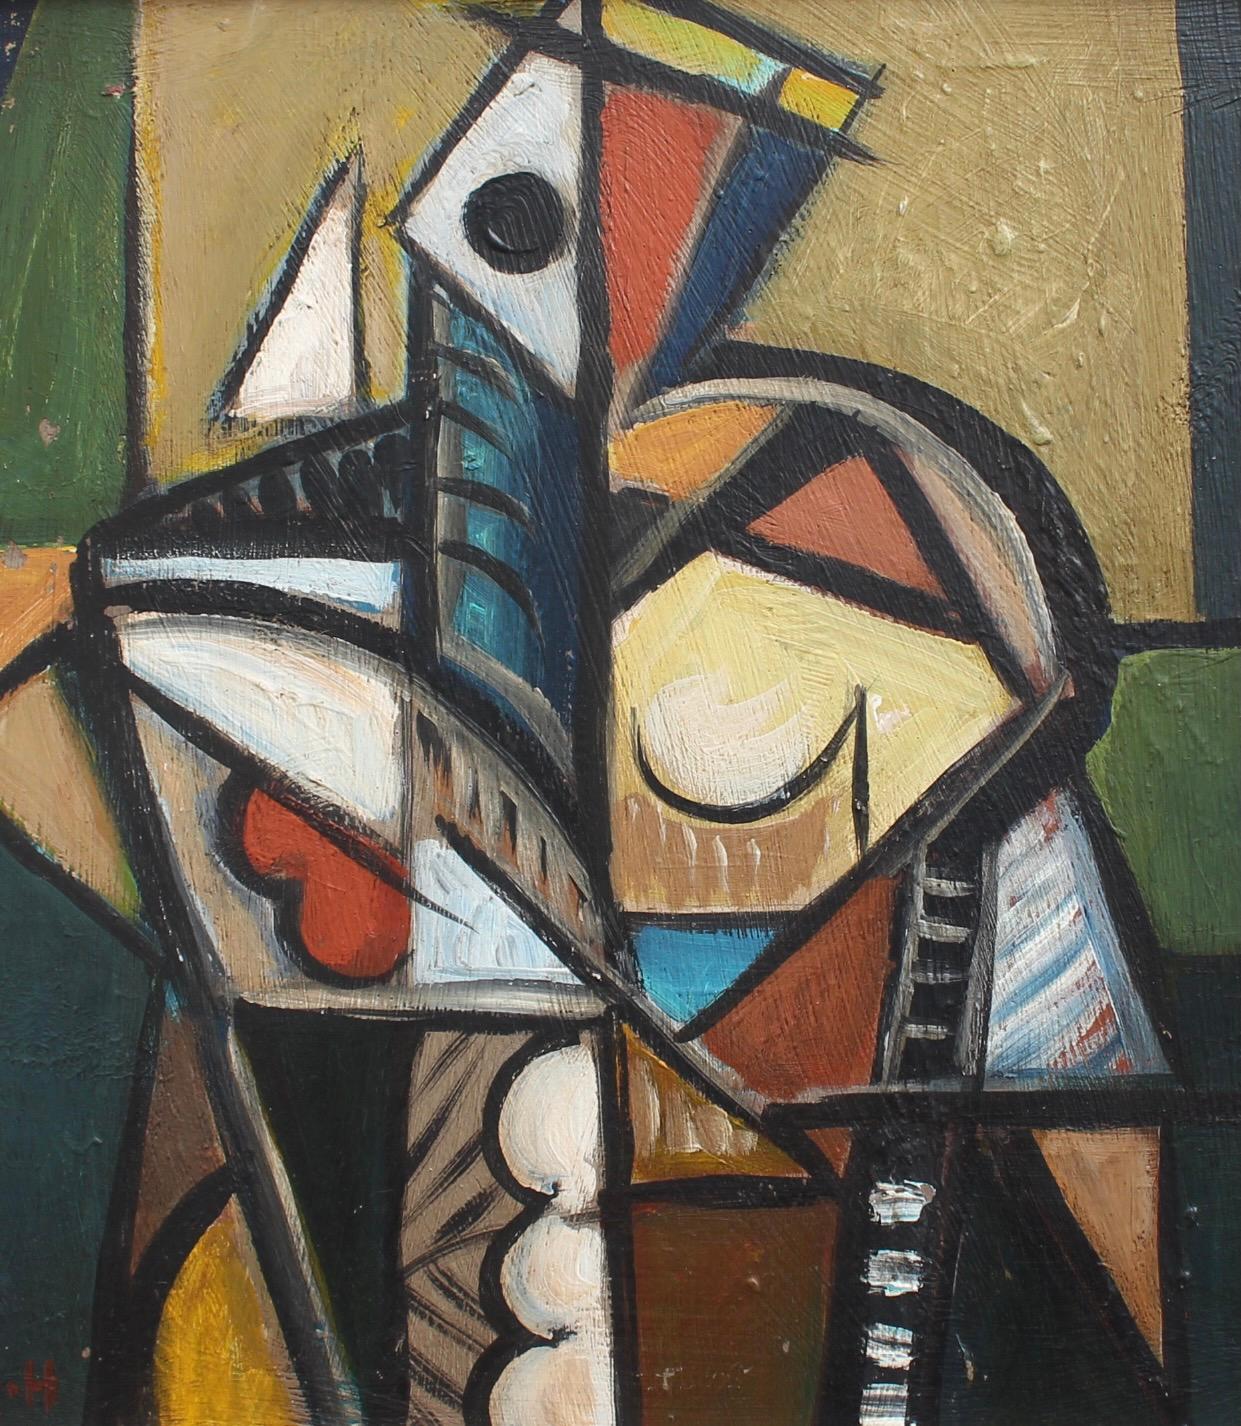 Unknown Abstract Painting - 'Cubist Abstraction', Berlin School